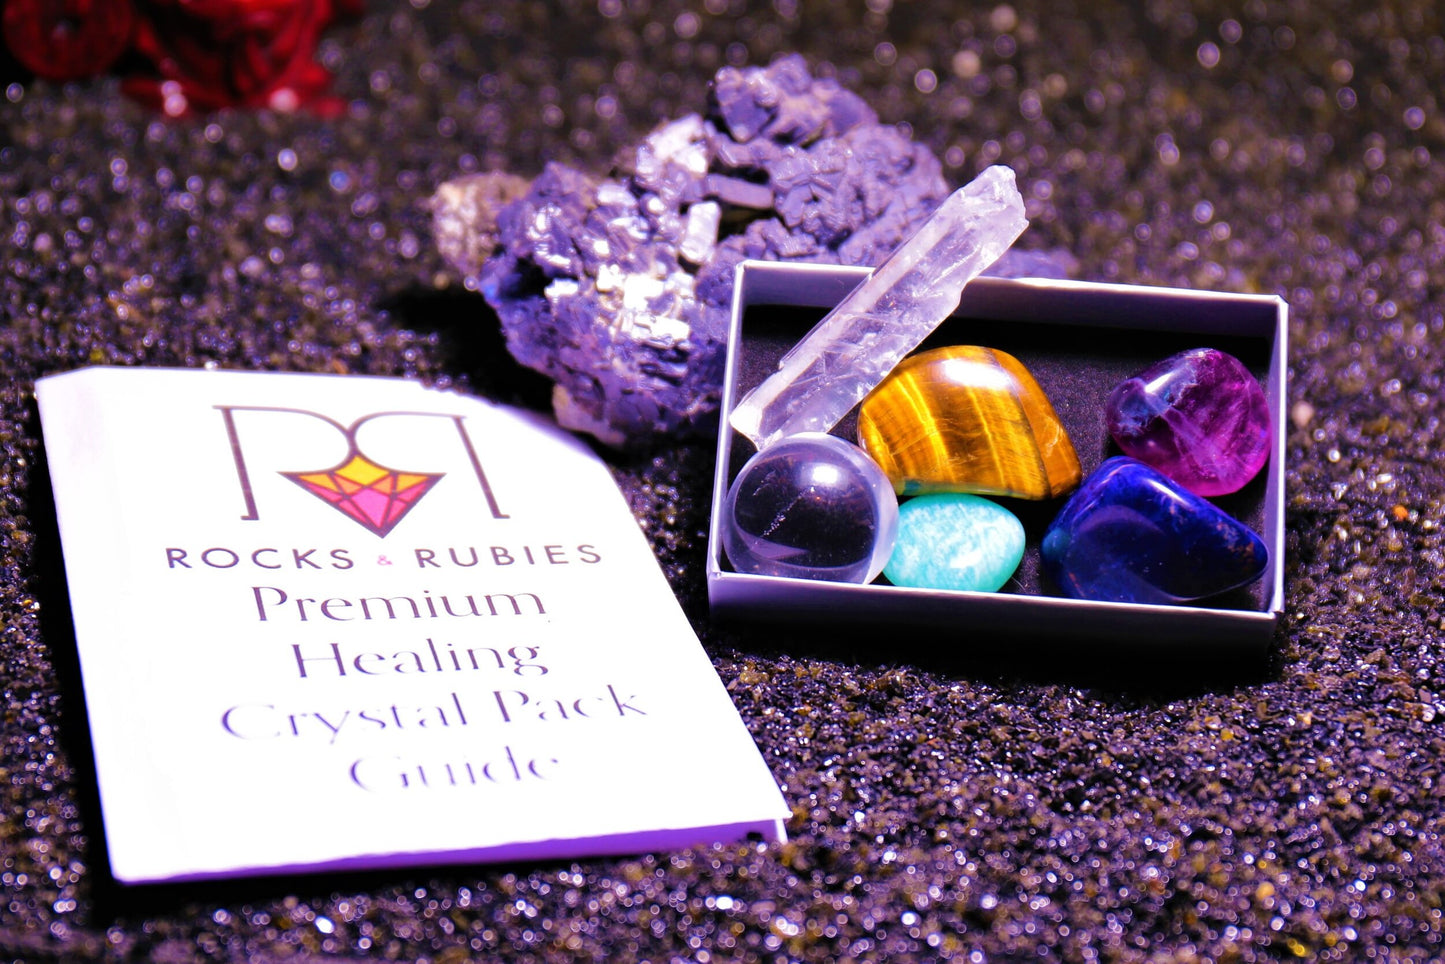 Study and Learning Helper Crystal Pack